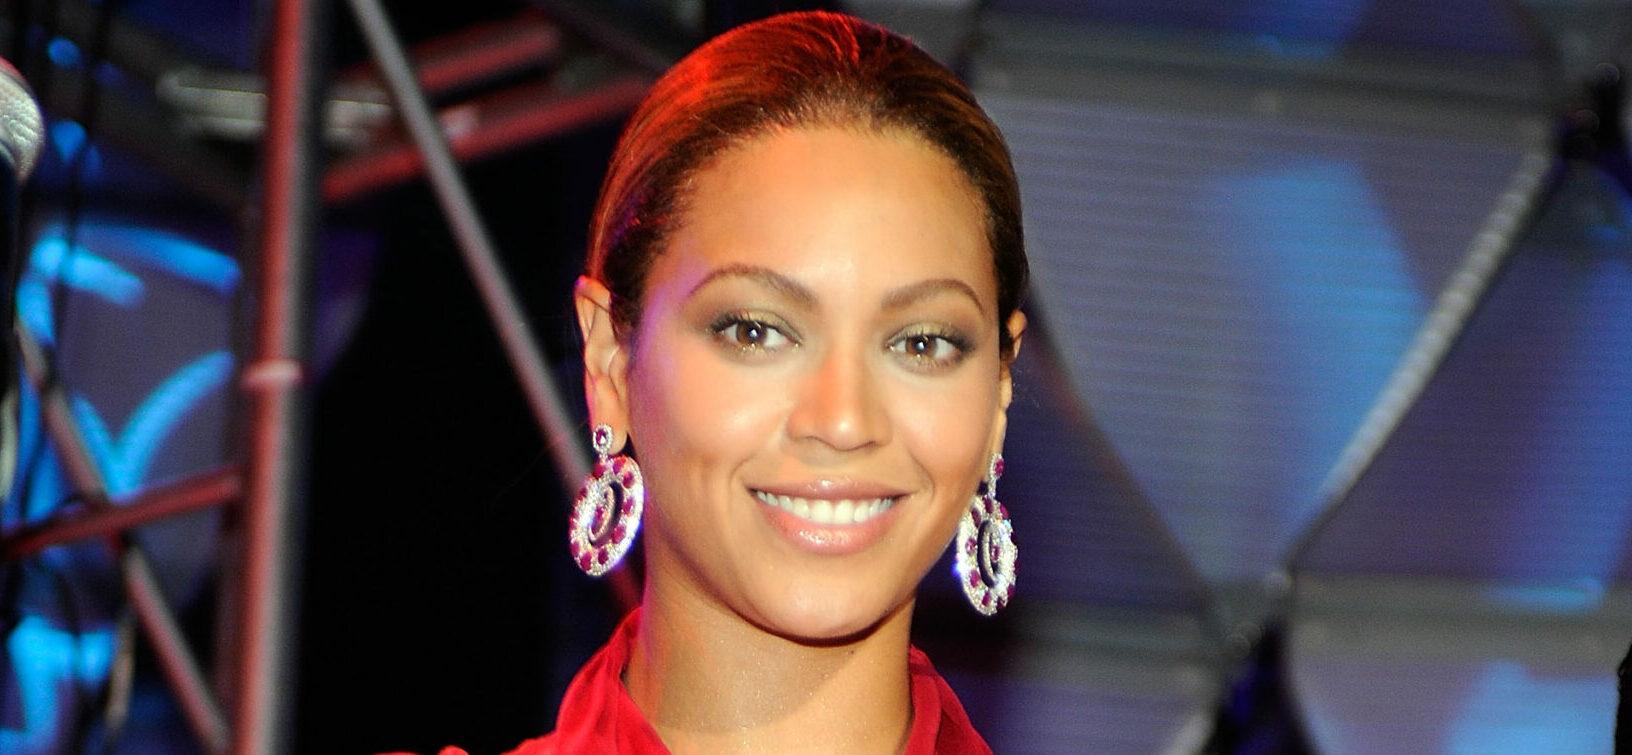 Beyoncé Reveals Struggle With Childhood Psoriasis On Her Head